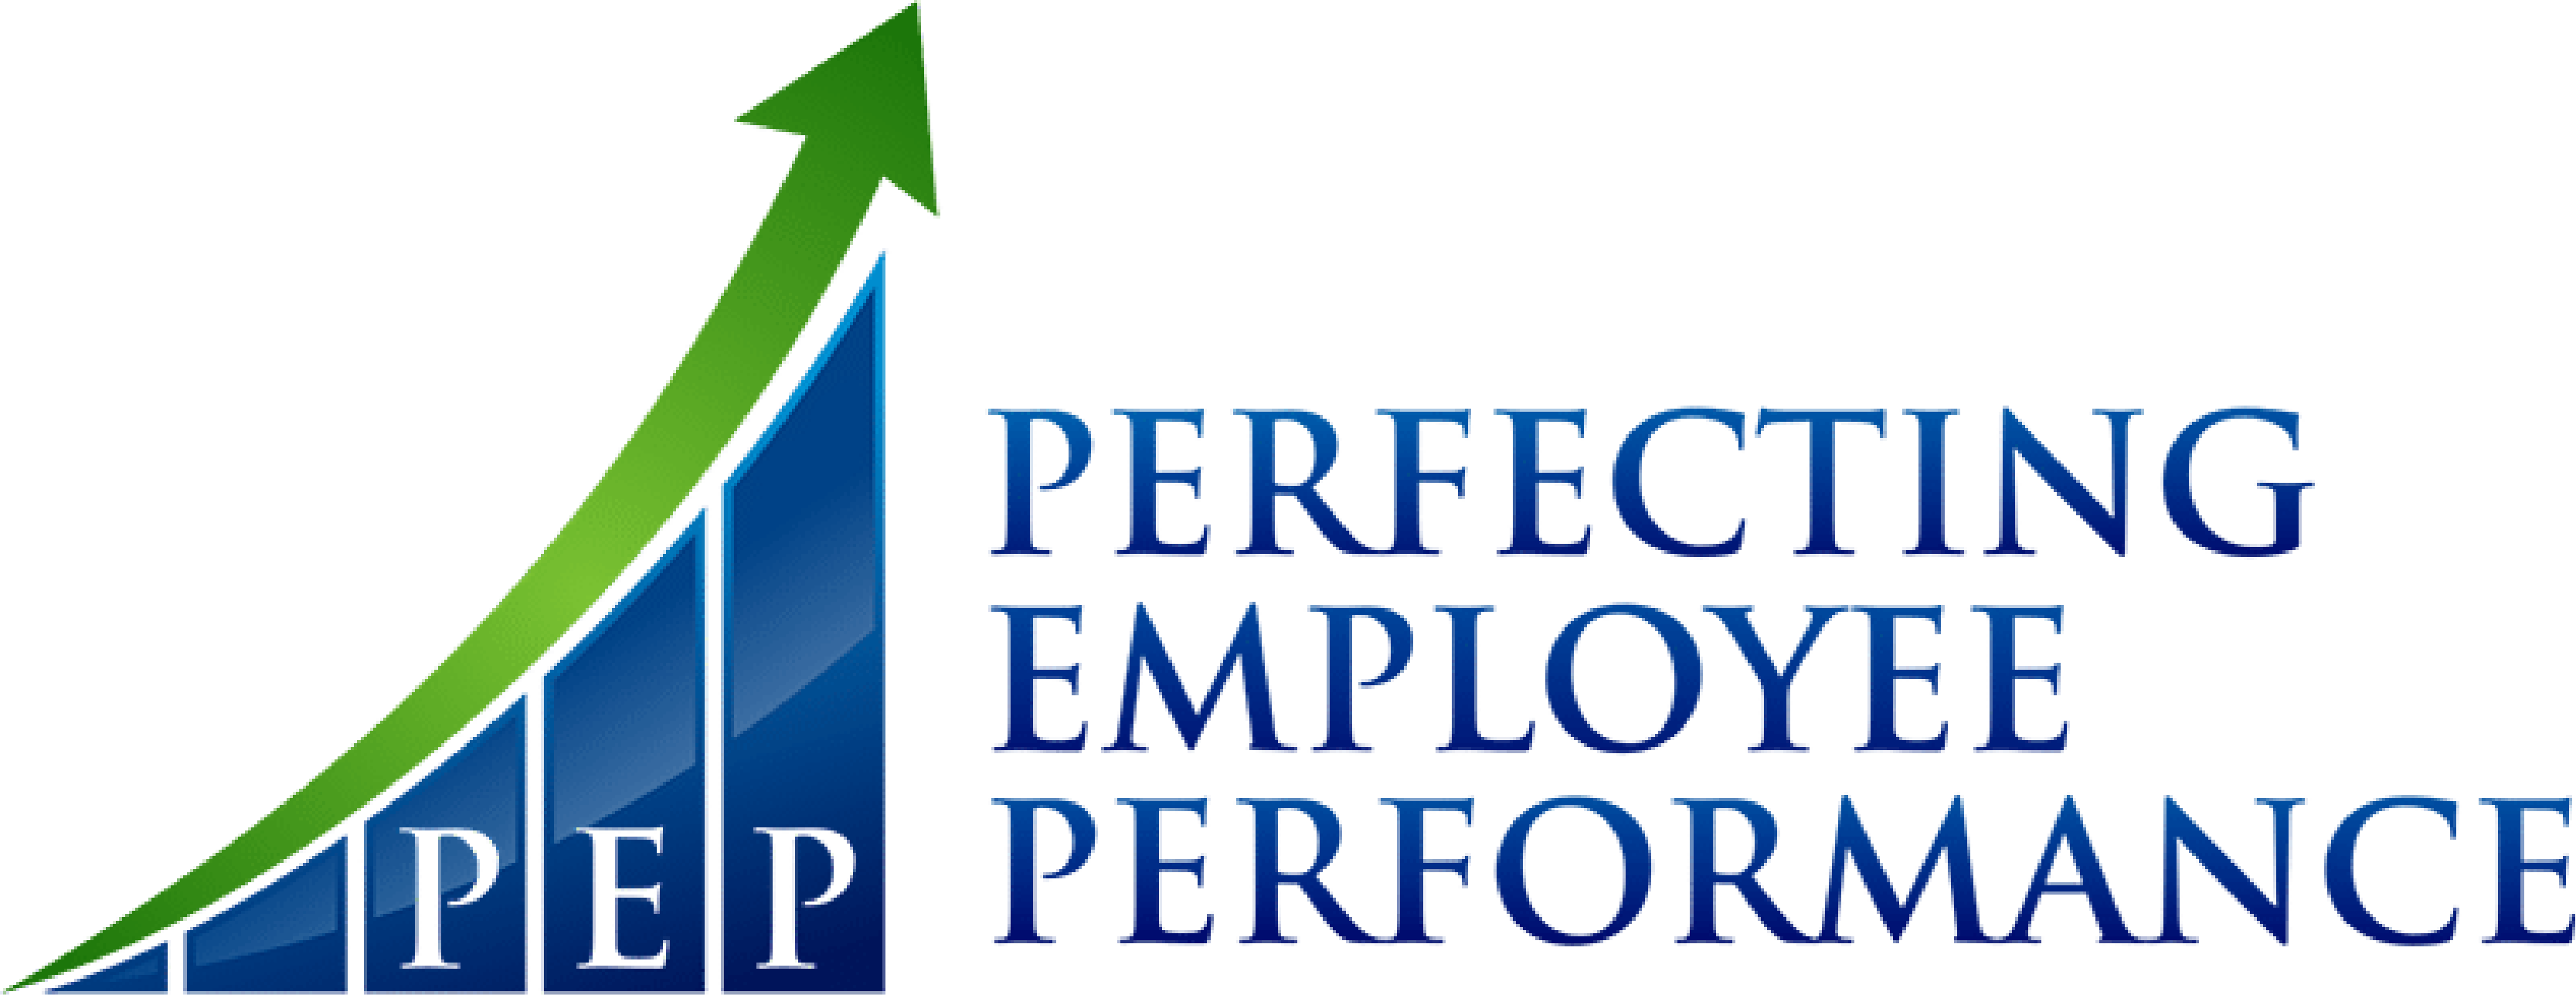 Employee Performance Appraisal and Evaluation Software | PEP